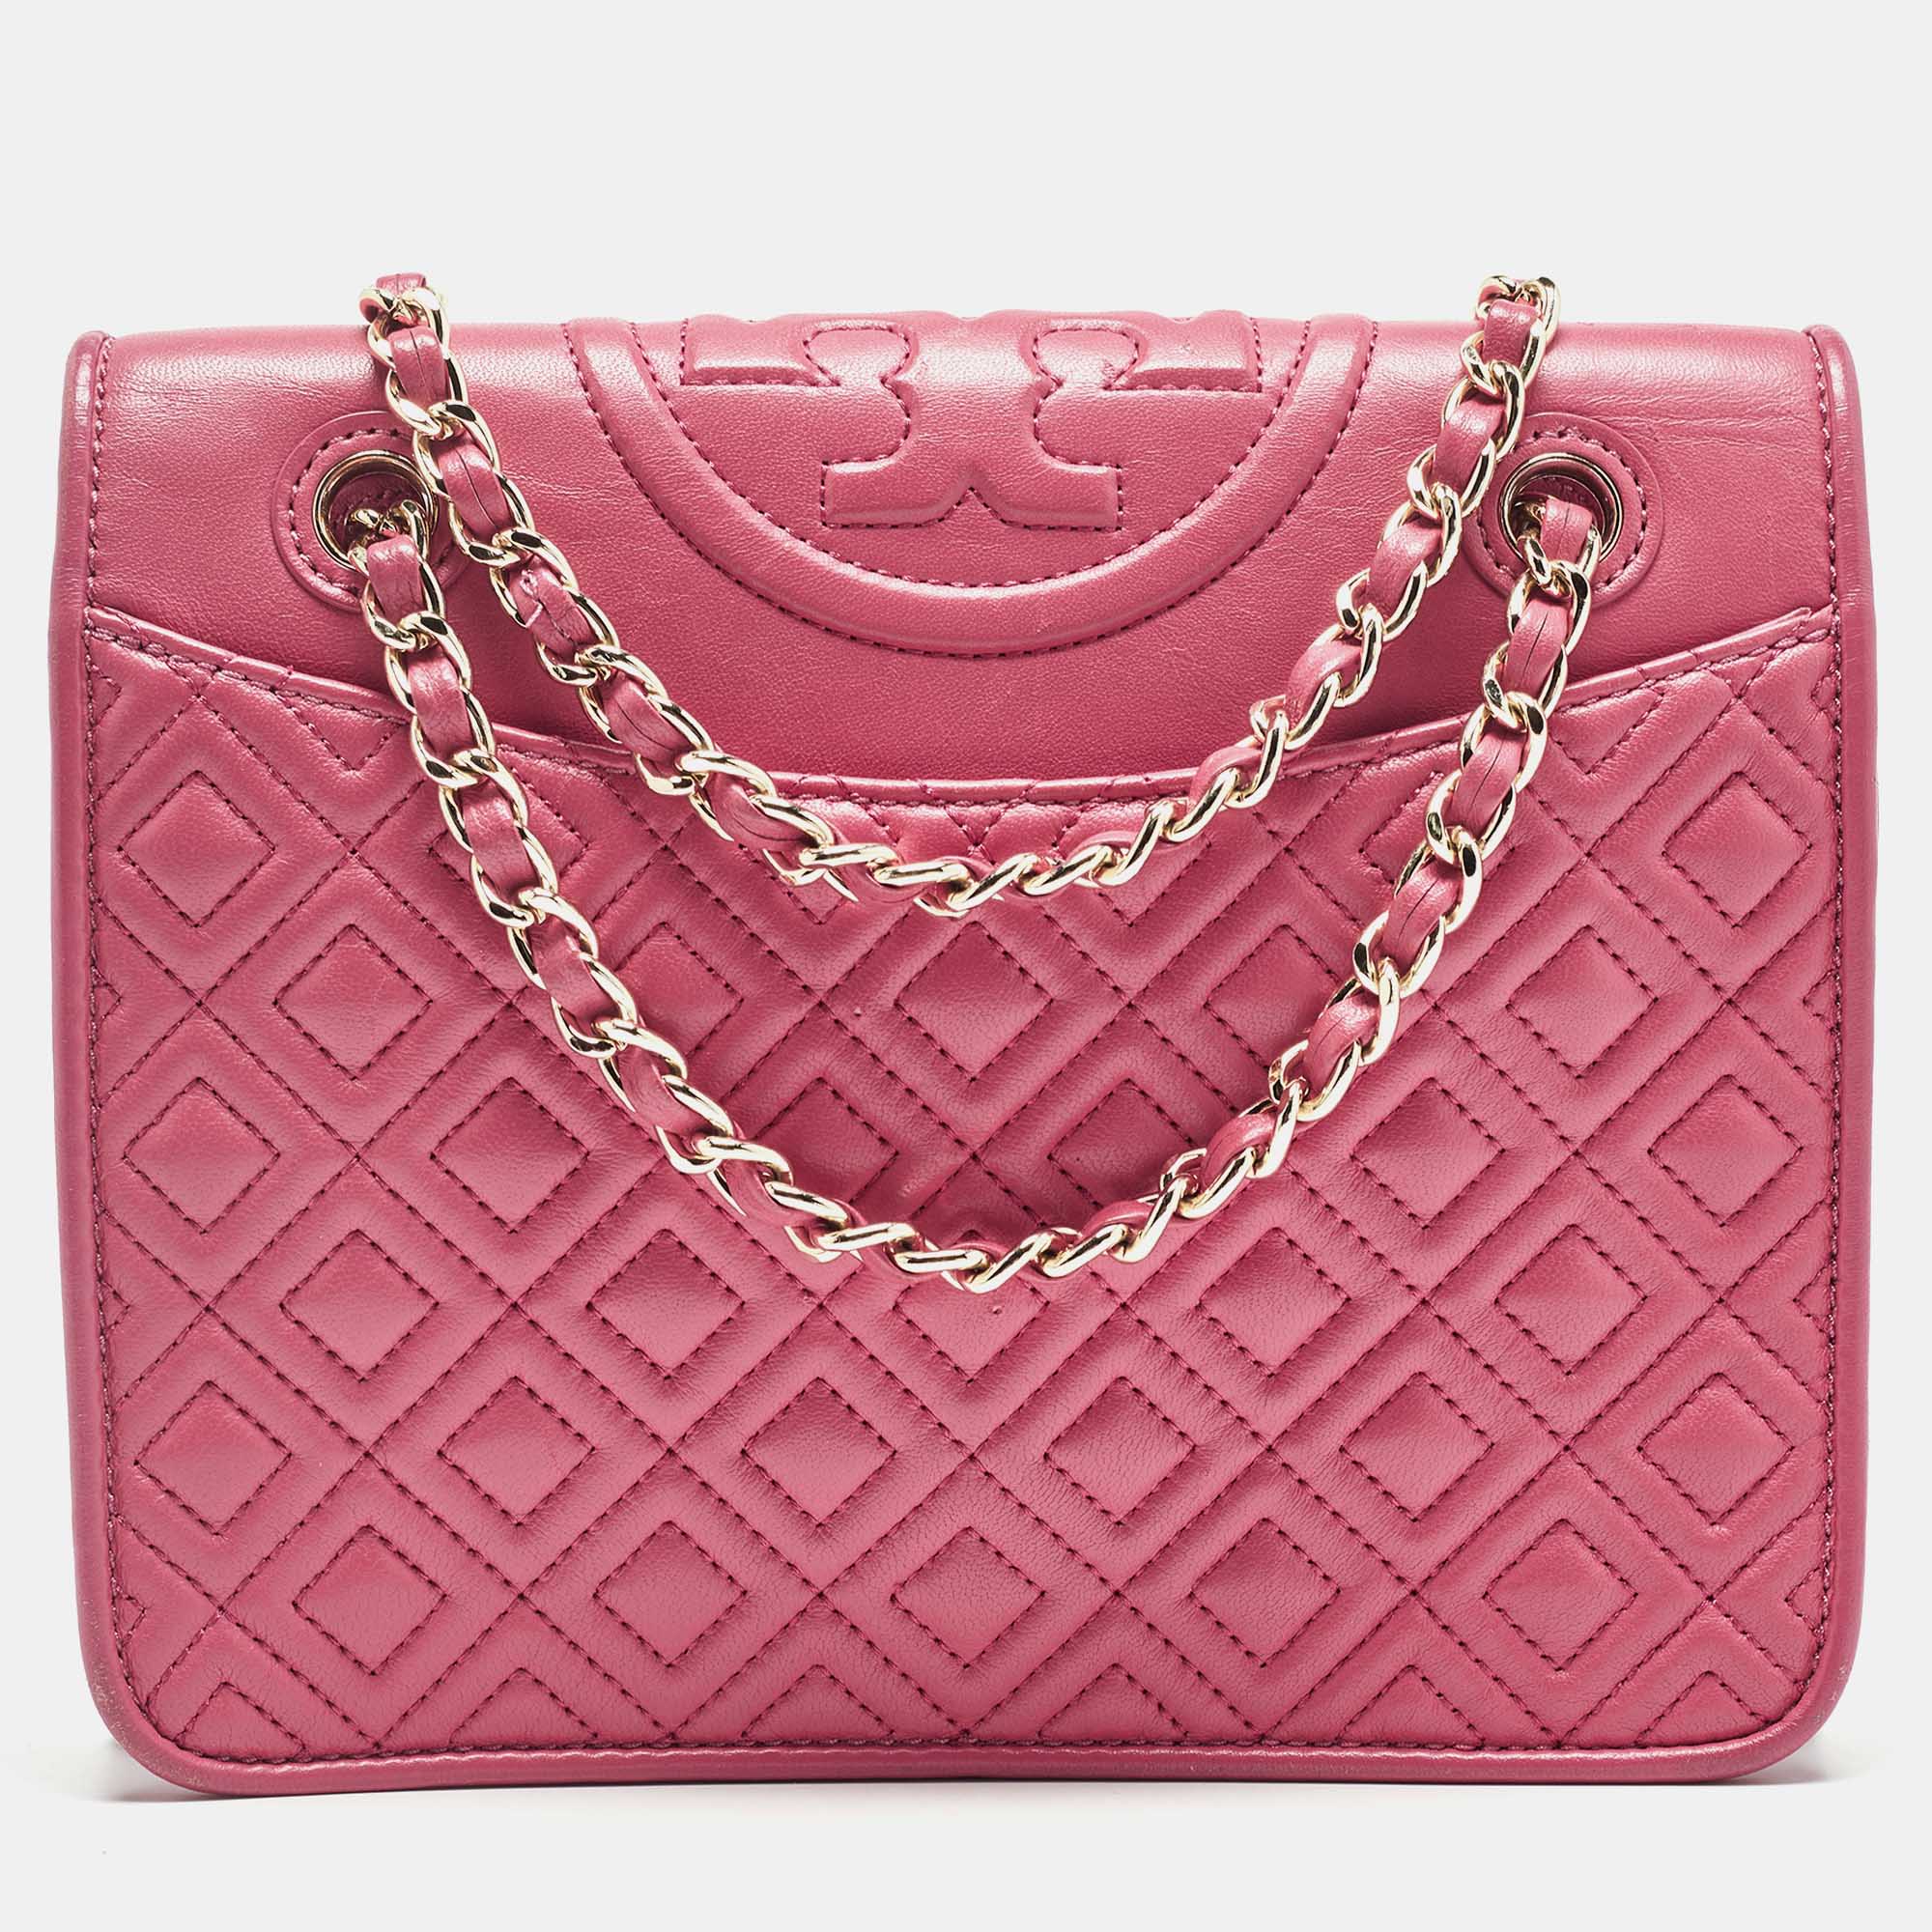 

Tory Burch Pink Leather Small Fleming Shoulder Bag